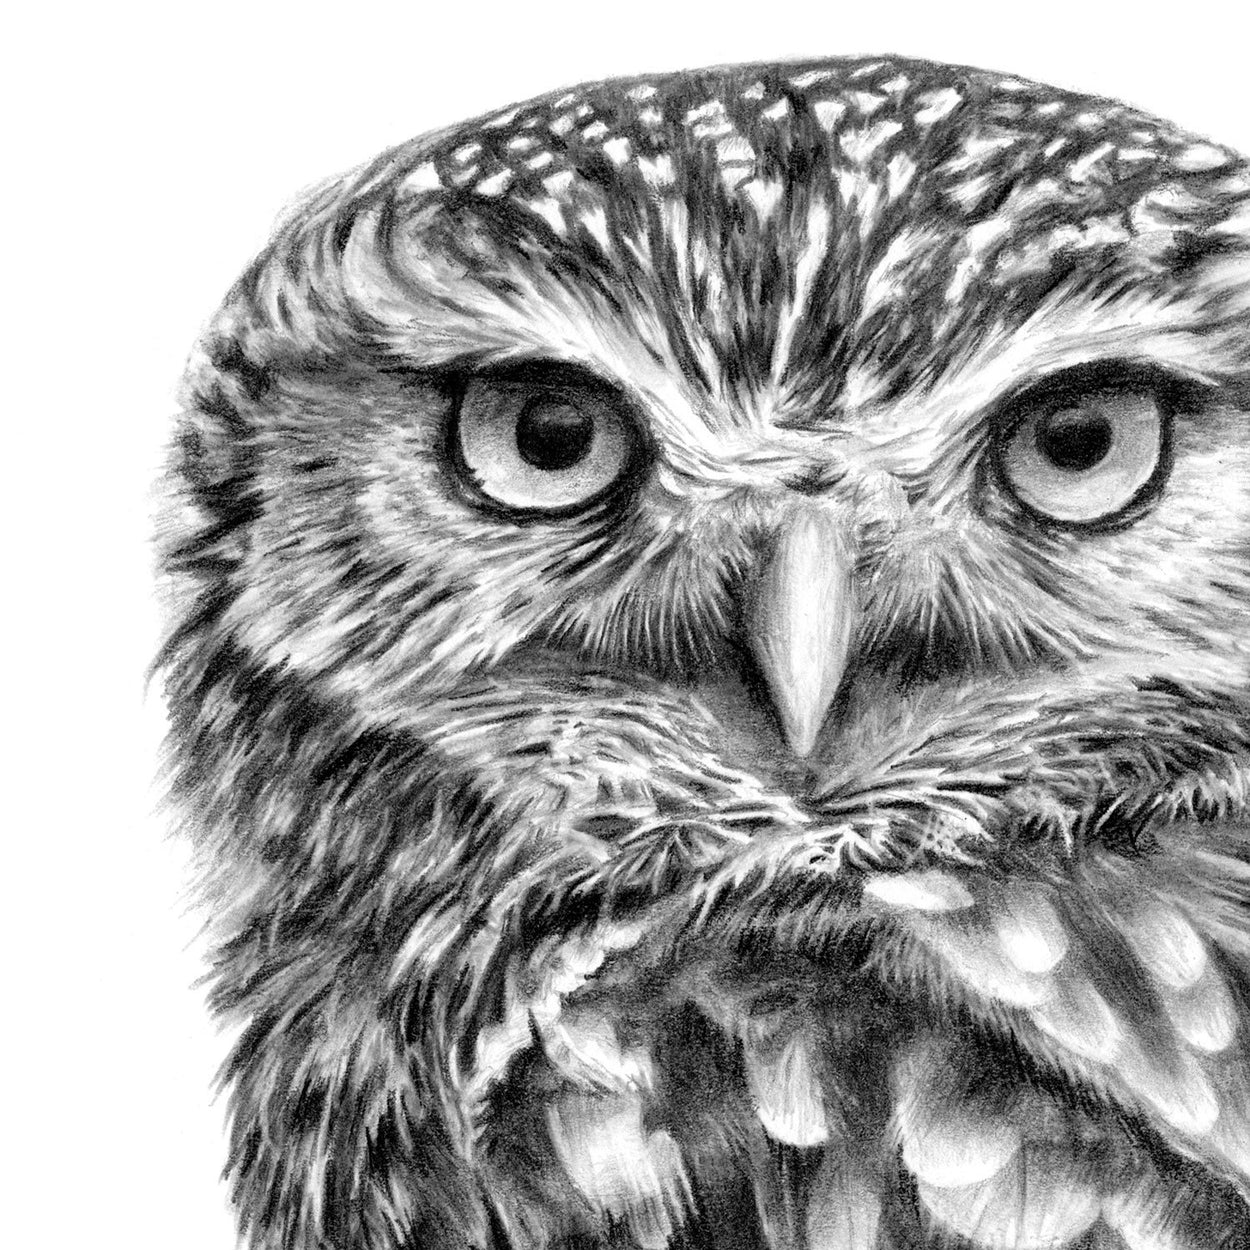 Little Owl Face Pencil Drawing Close-up - The Thriving Wild